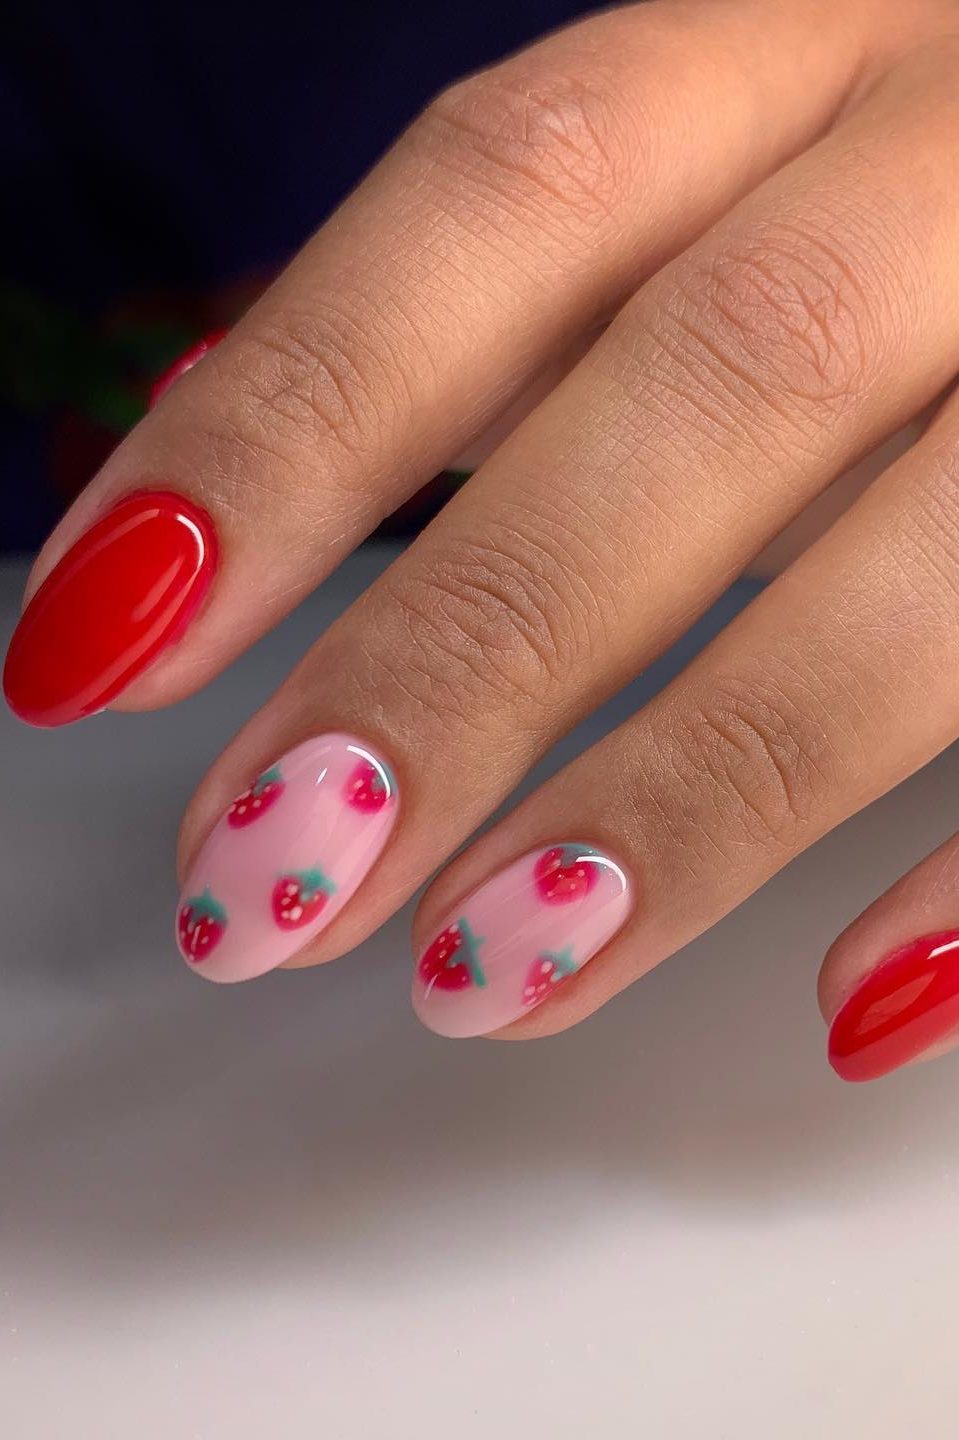 Strawberry nails, red nails with cute little strawberries